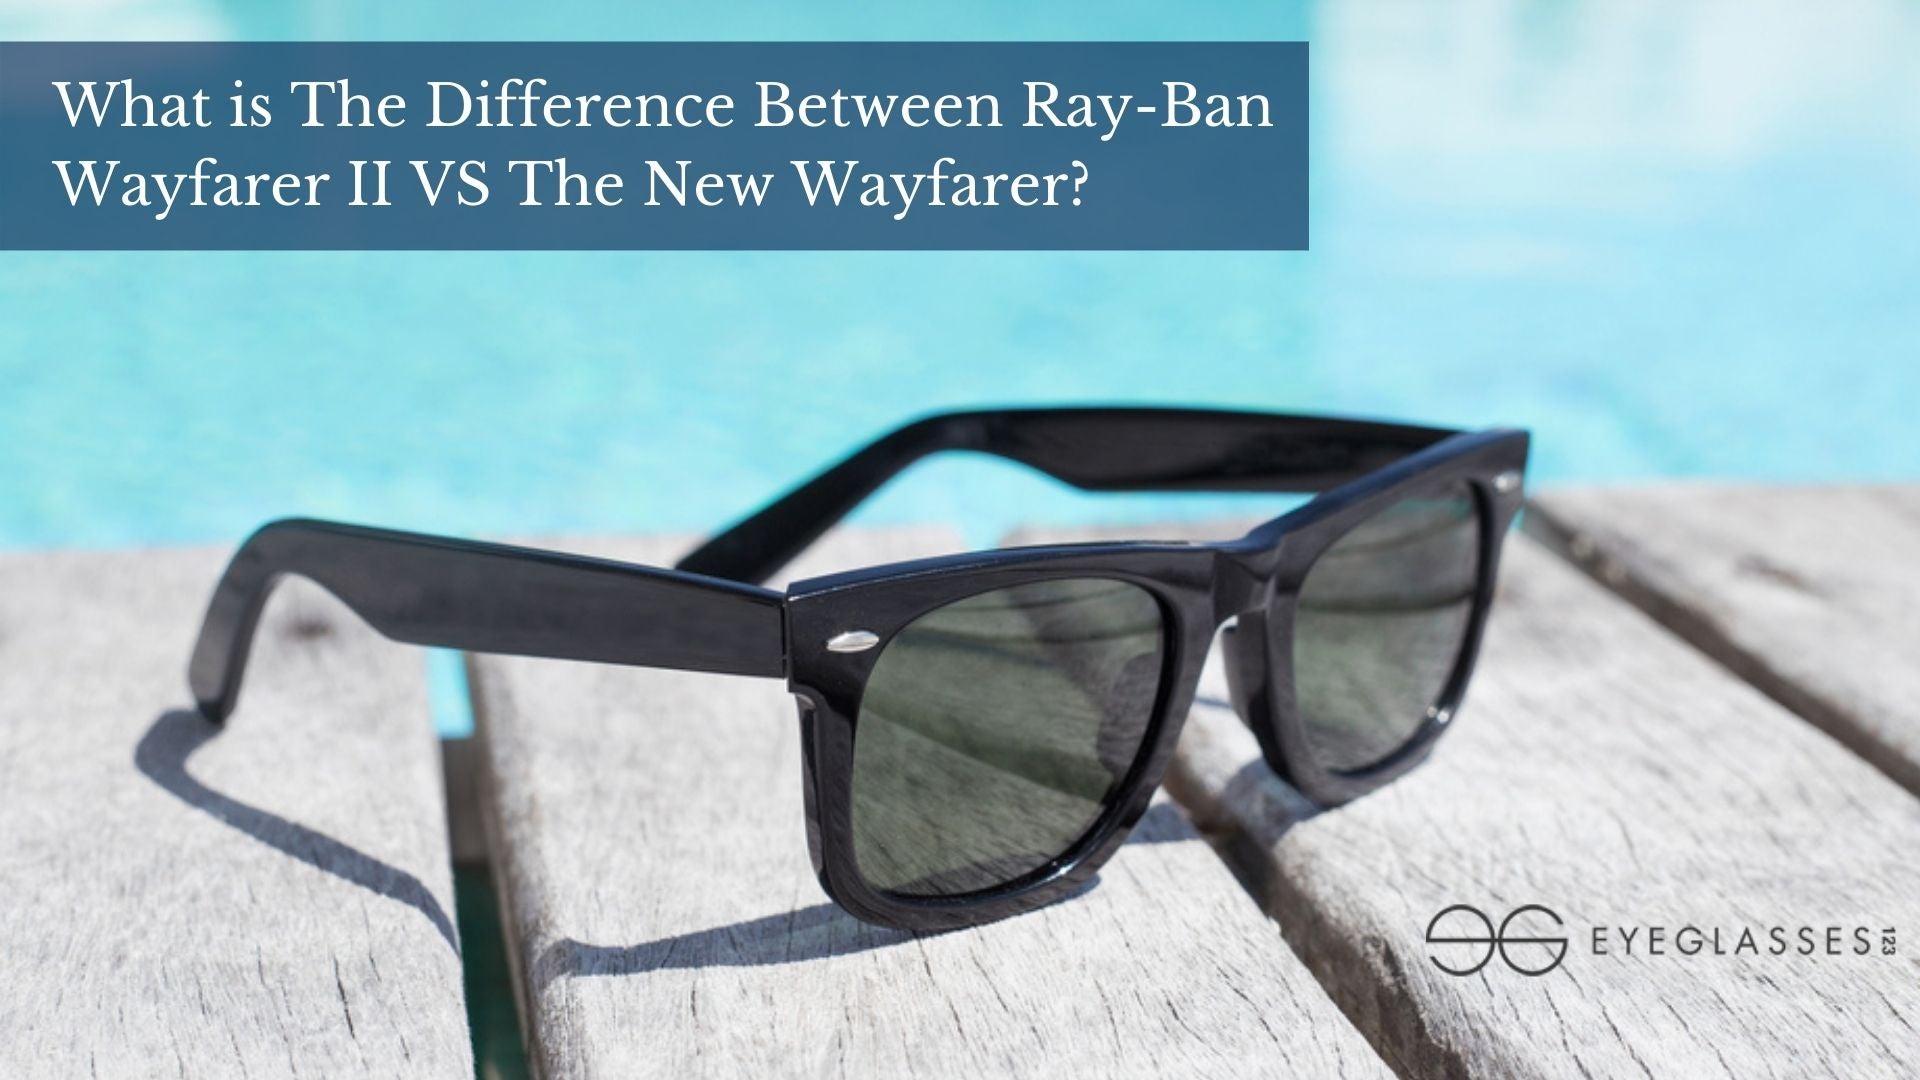 What is The Difference Between Ray-Ban Wayfarer II VS The New Wayfarer?